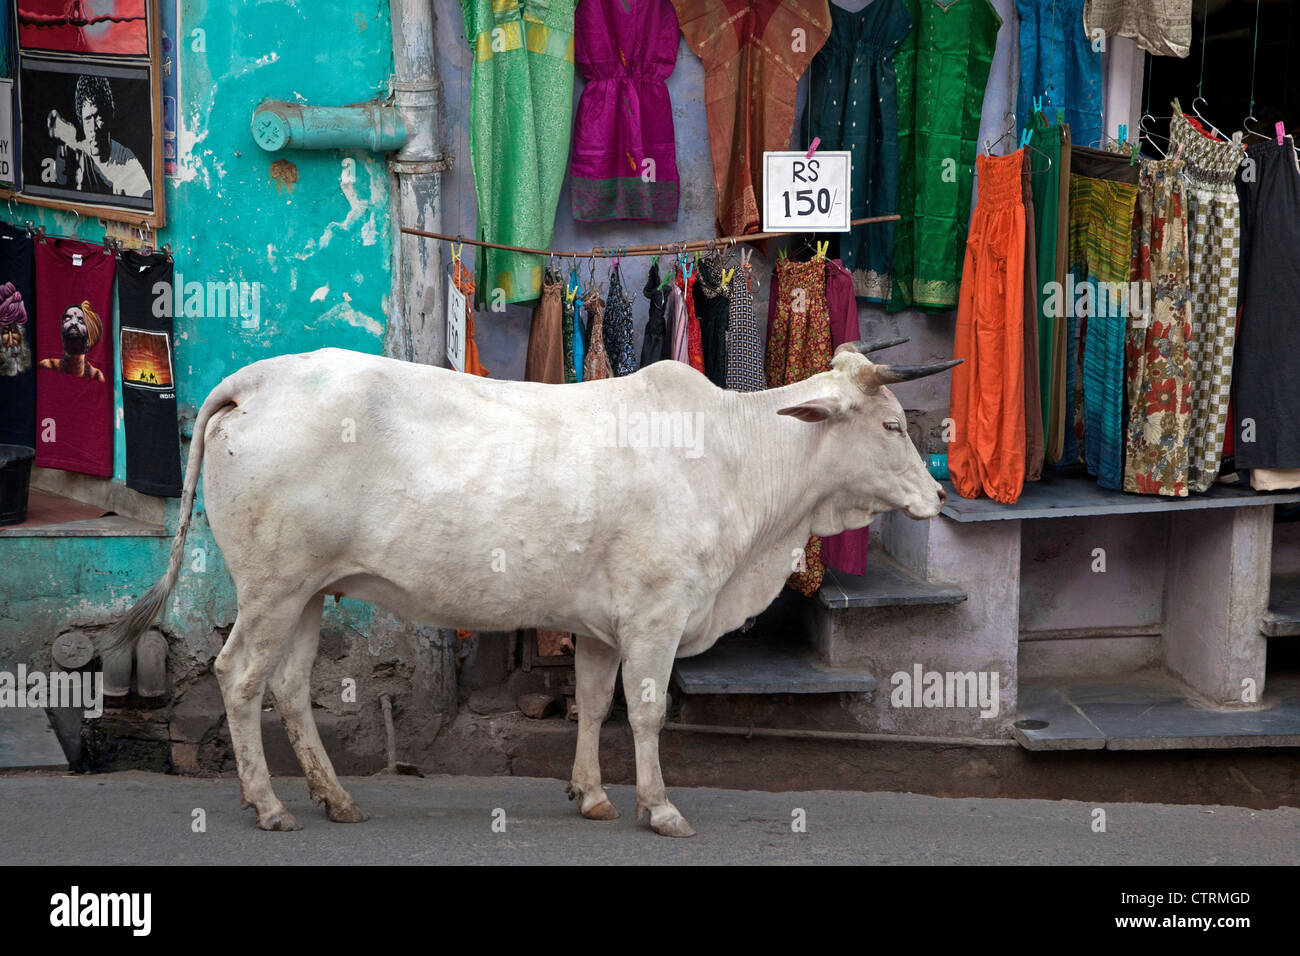 Sacred cow in shopping street of Udaipur, Rajasthan, India Stock Photo